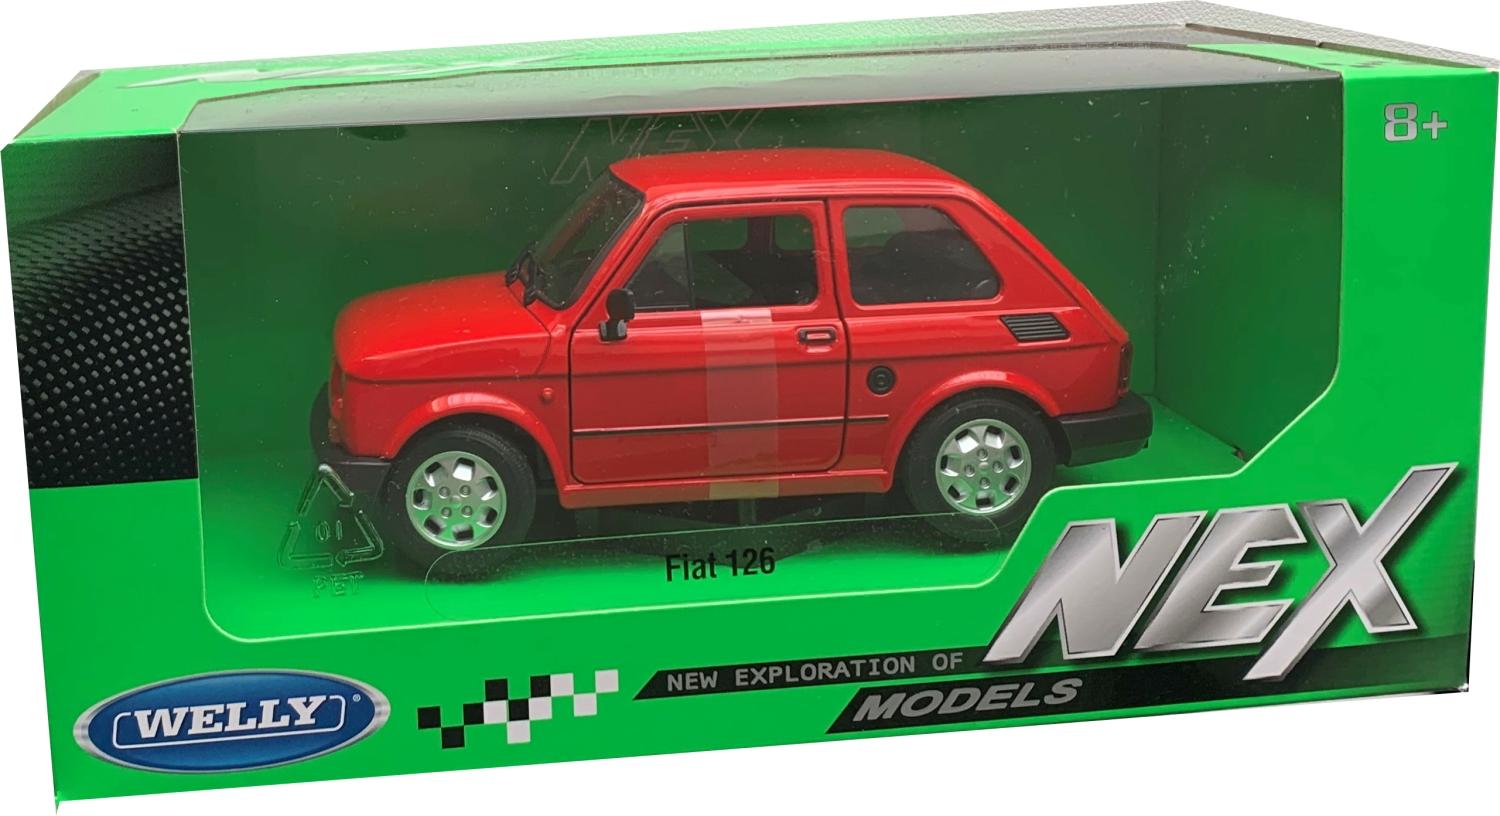 Fiat 126 in red 1:24 scale model from Welly / NEX